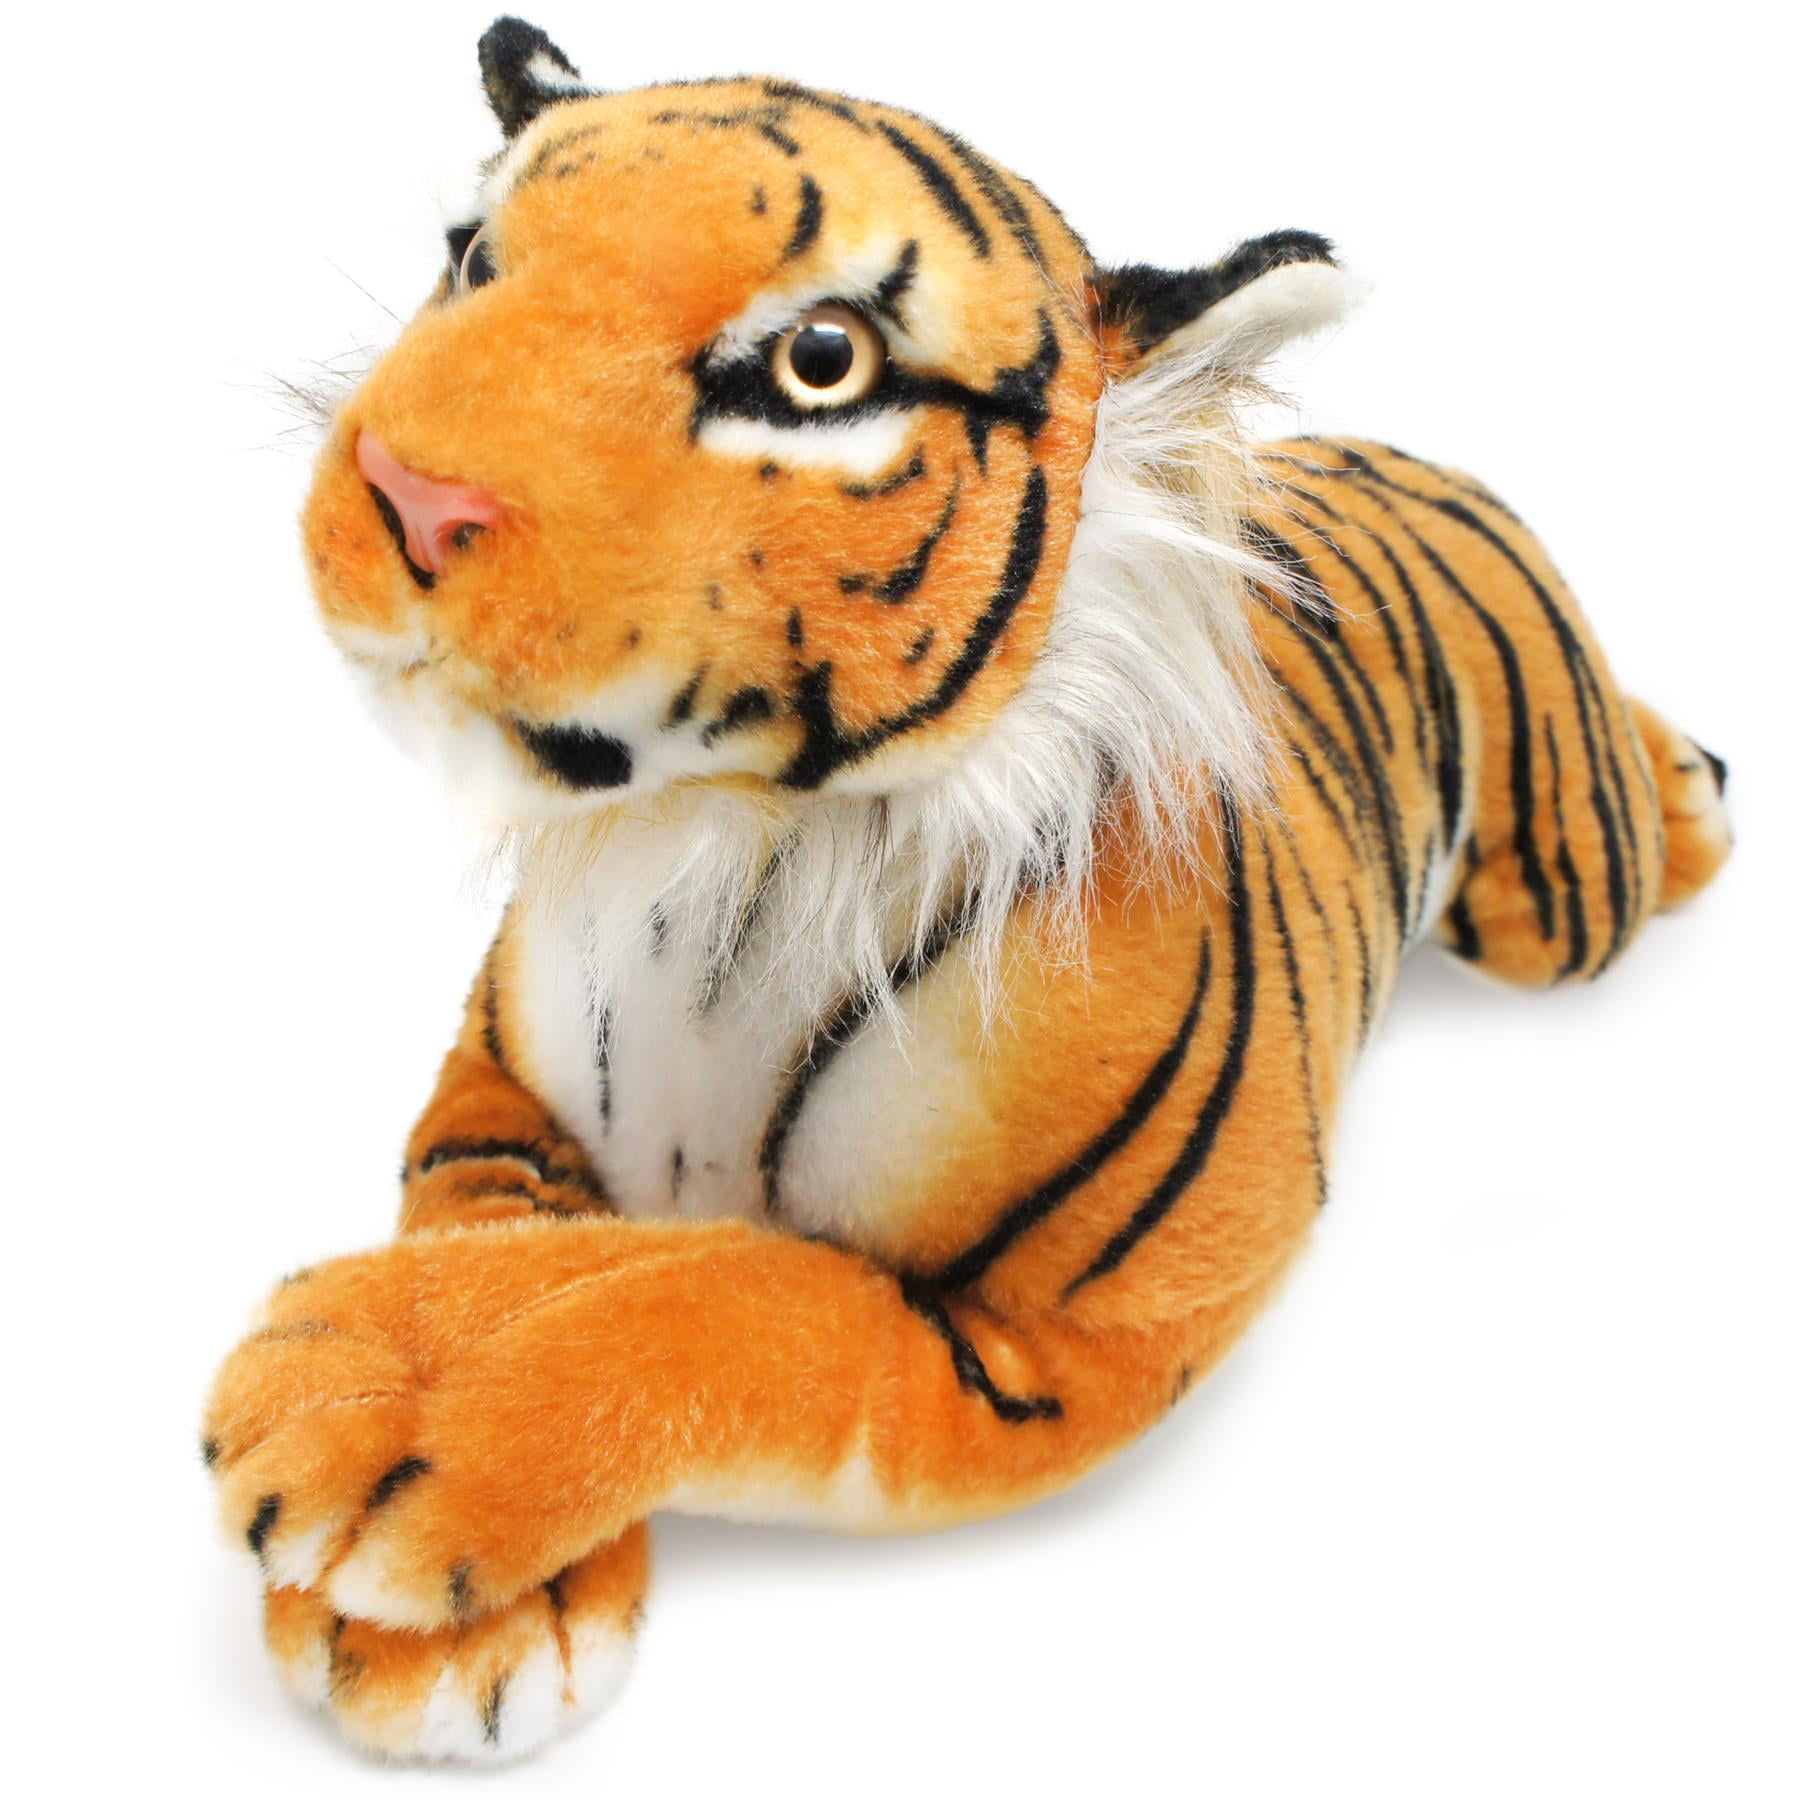 Large Tiger Stuffed Toy Plush 24" Plus Tail Big Cat by Best Made Toys Rare 